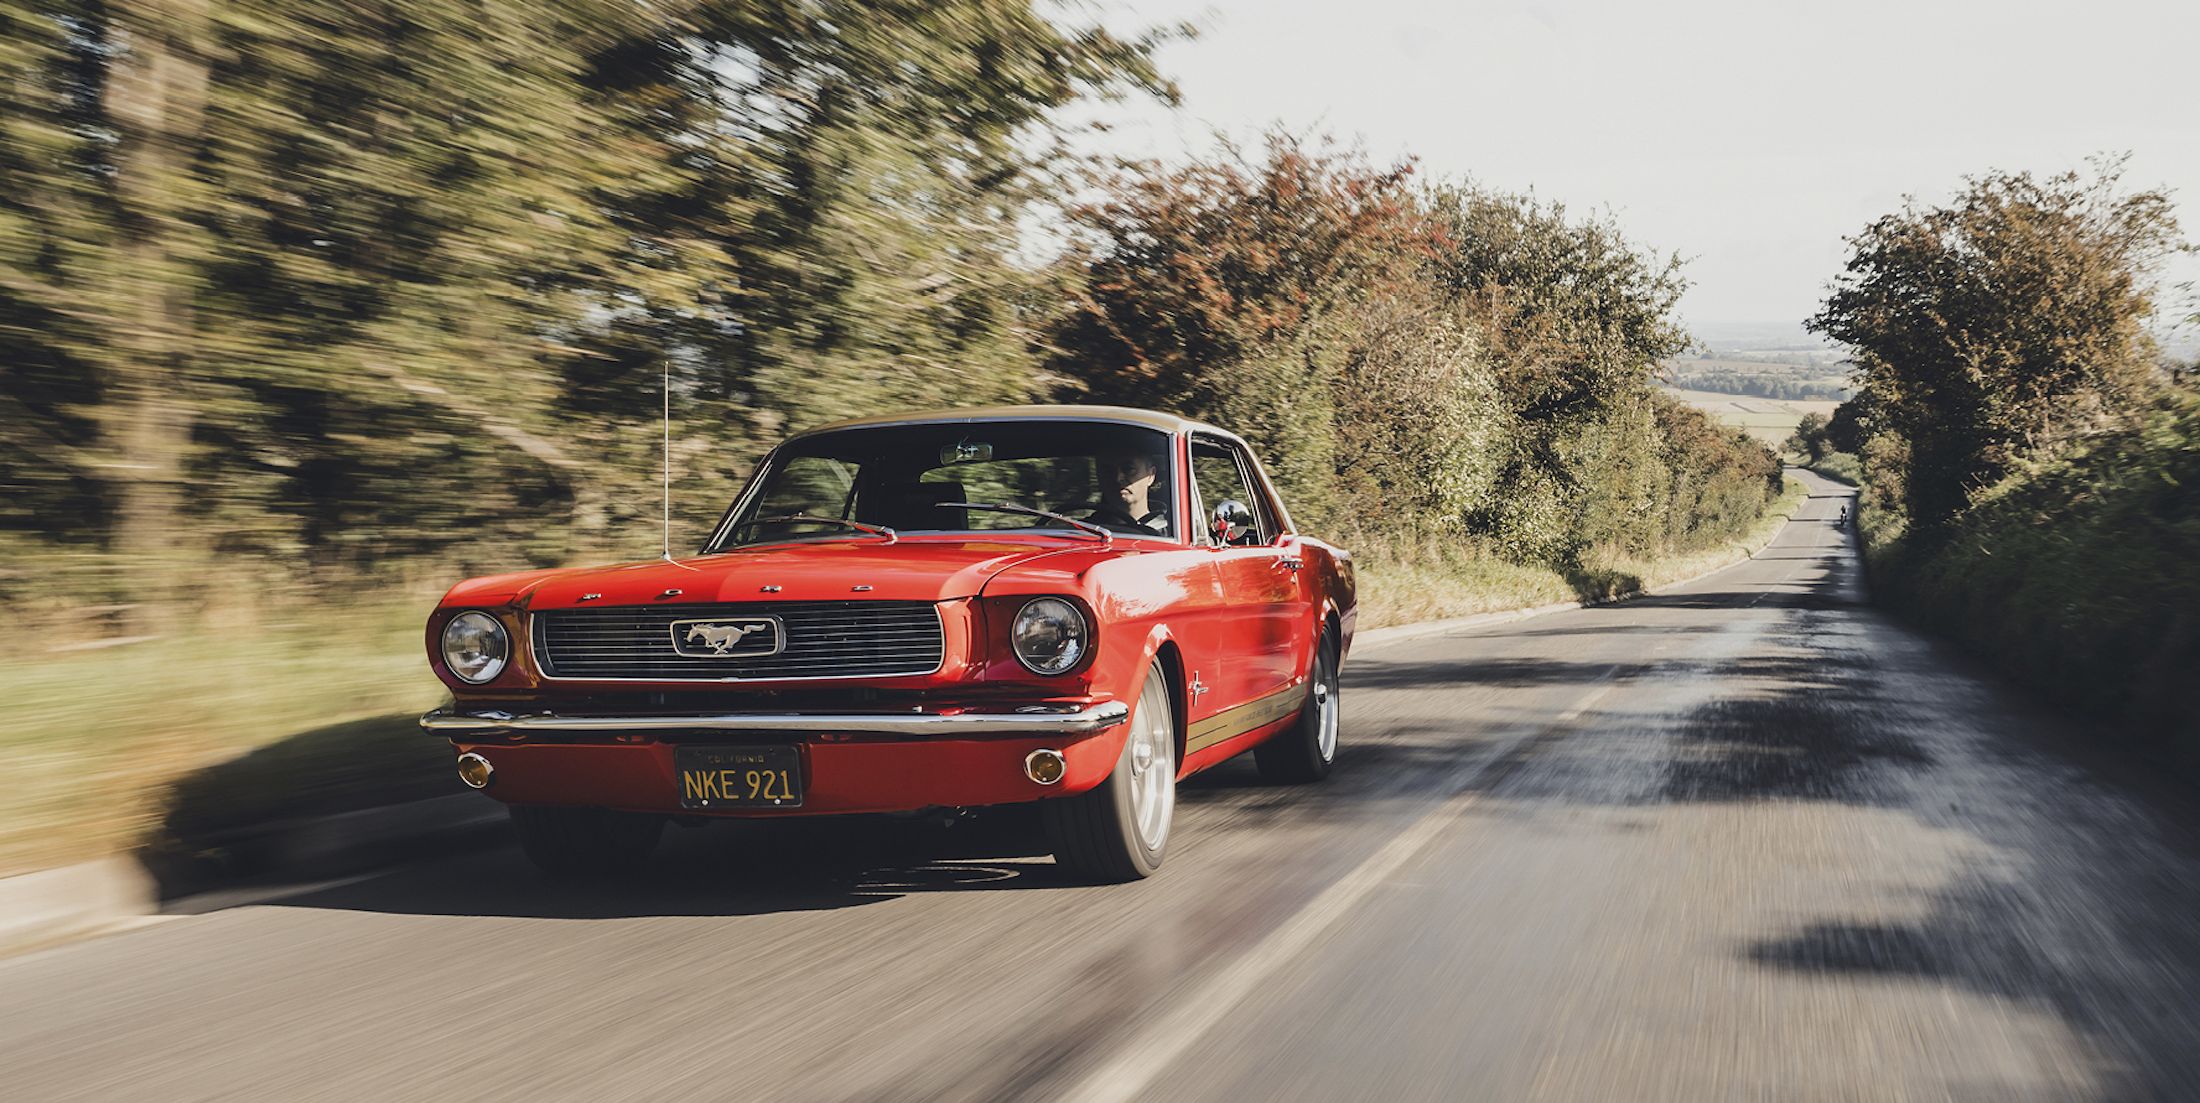 Silent Stallion: Driving an All-Electric 1965 Ford Mustang